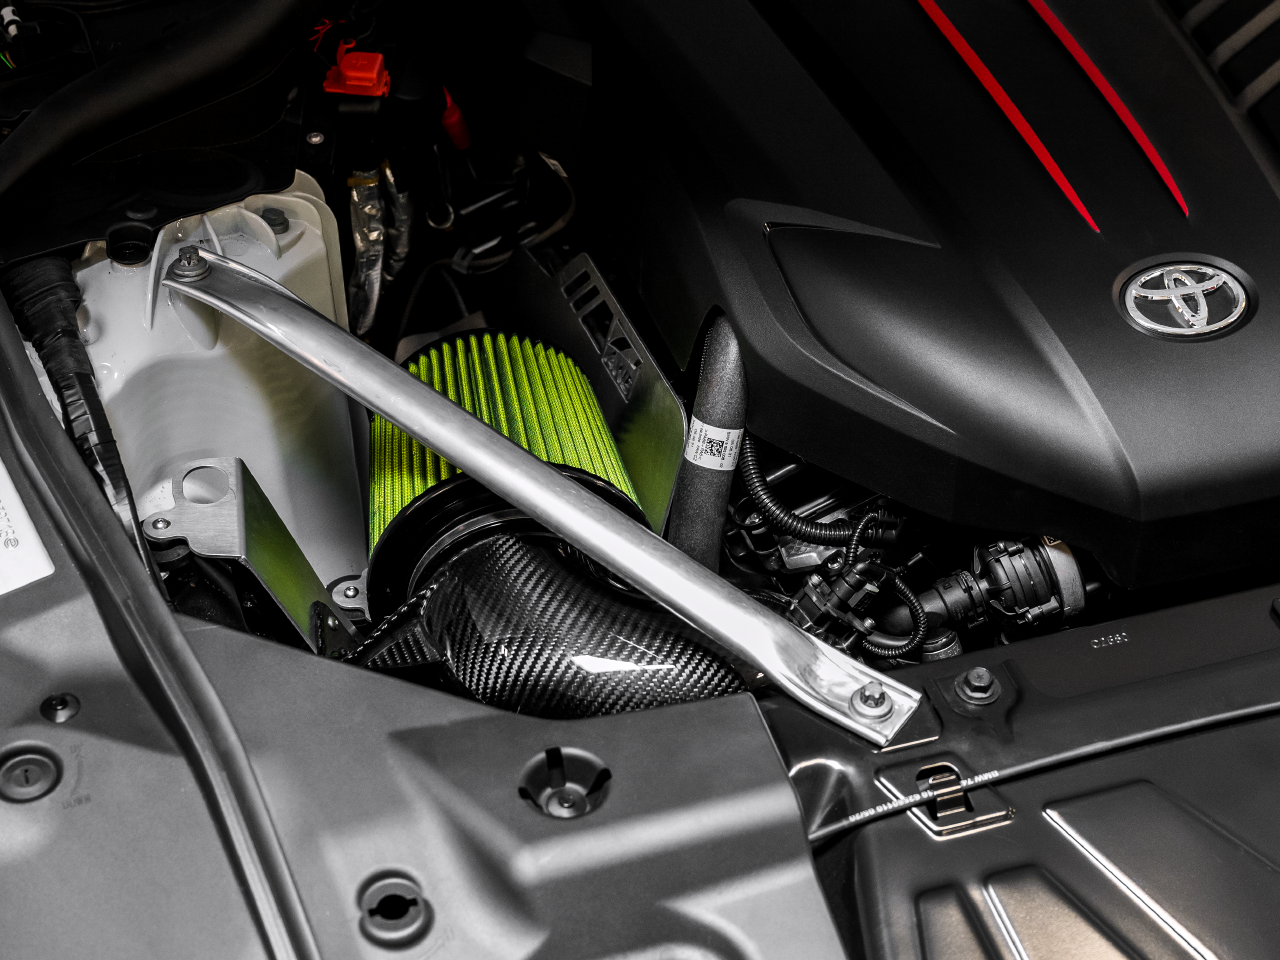 AWE Tuning 2020+ Toyota GR Supra S-FLO Carbon Intake for the MK5 Toyota Supra GR A90 MKV - Product Overview mounted in engine bay front/left view (facing the vehicle)